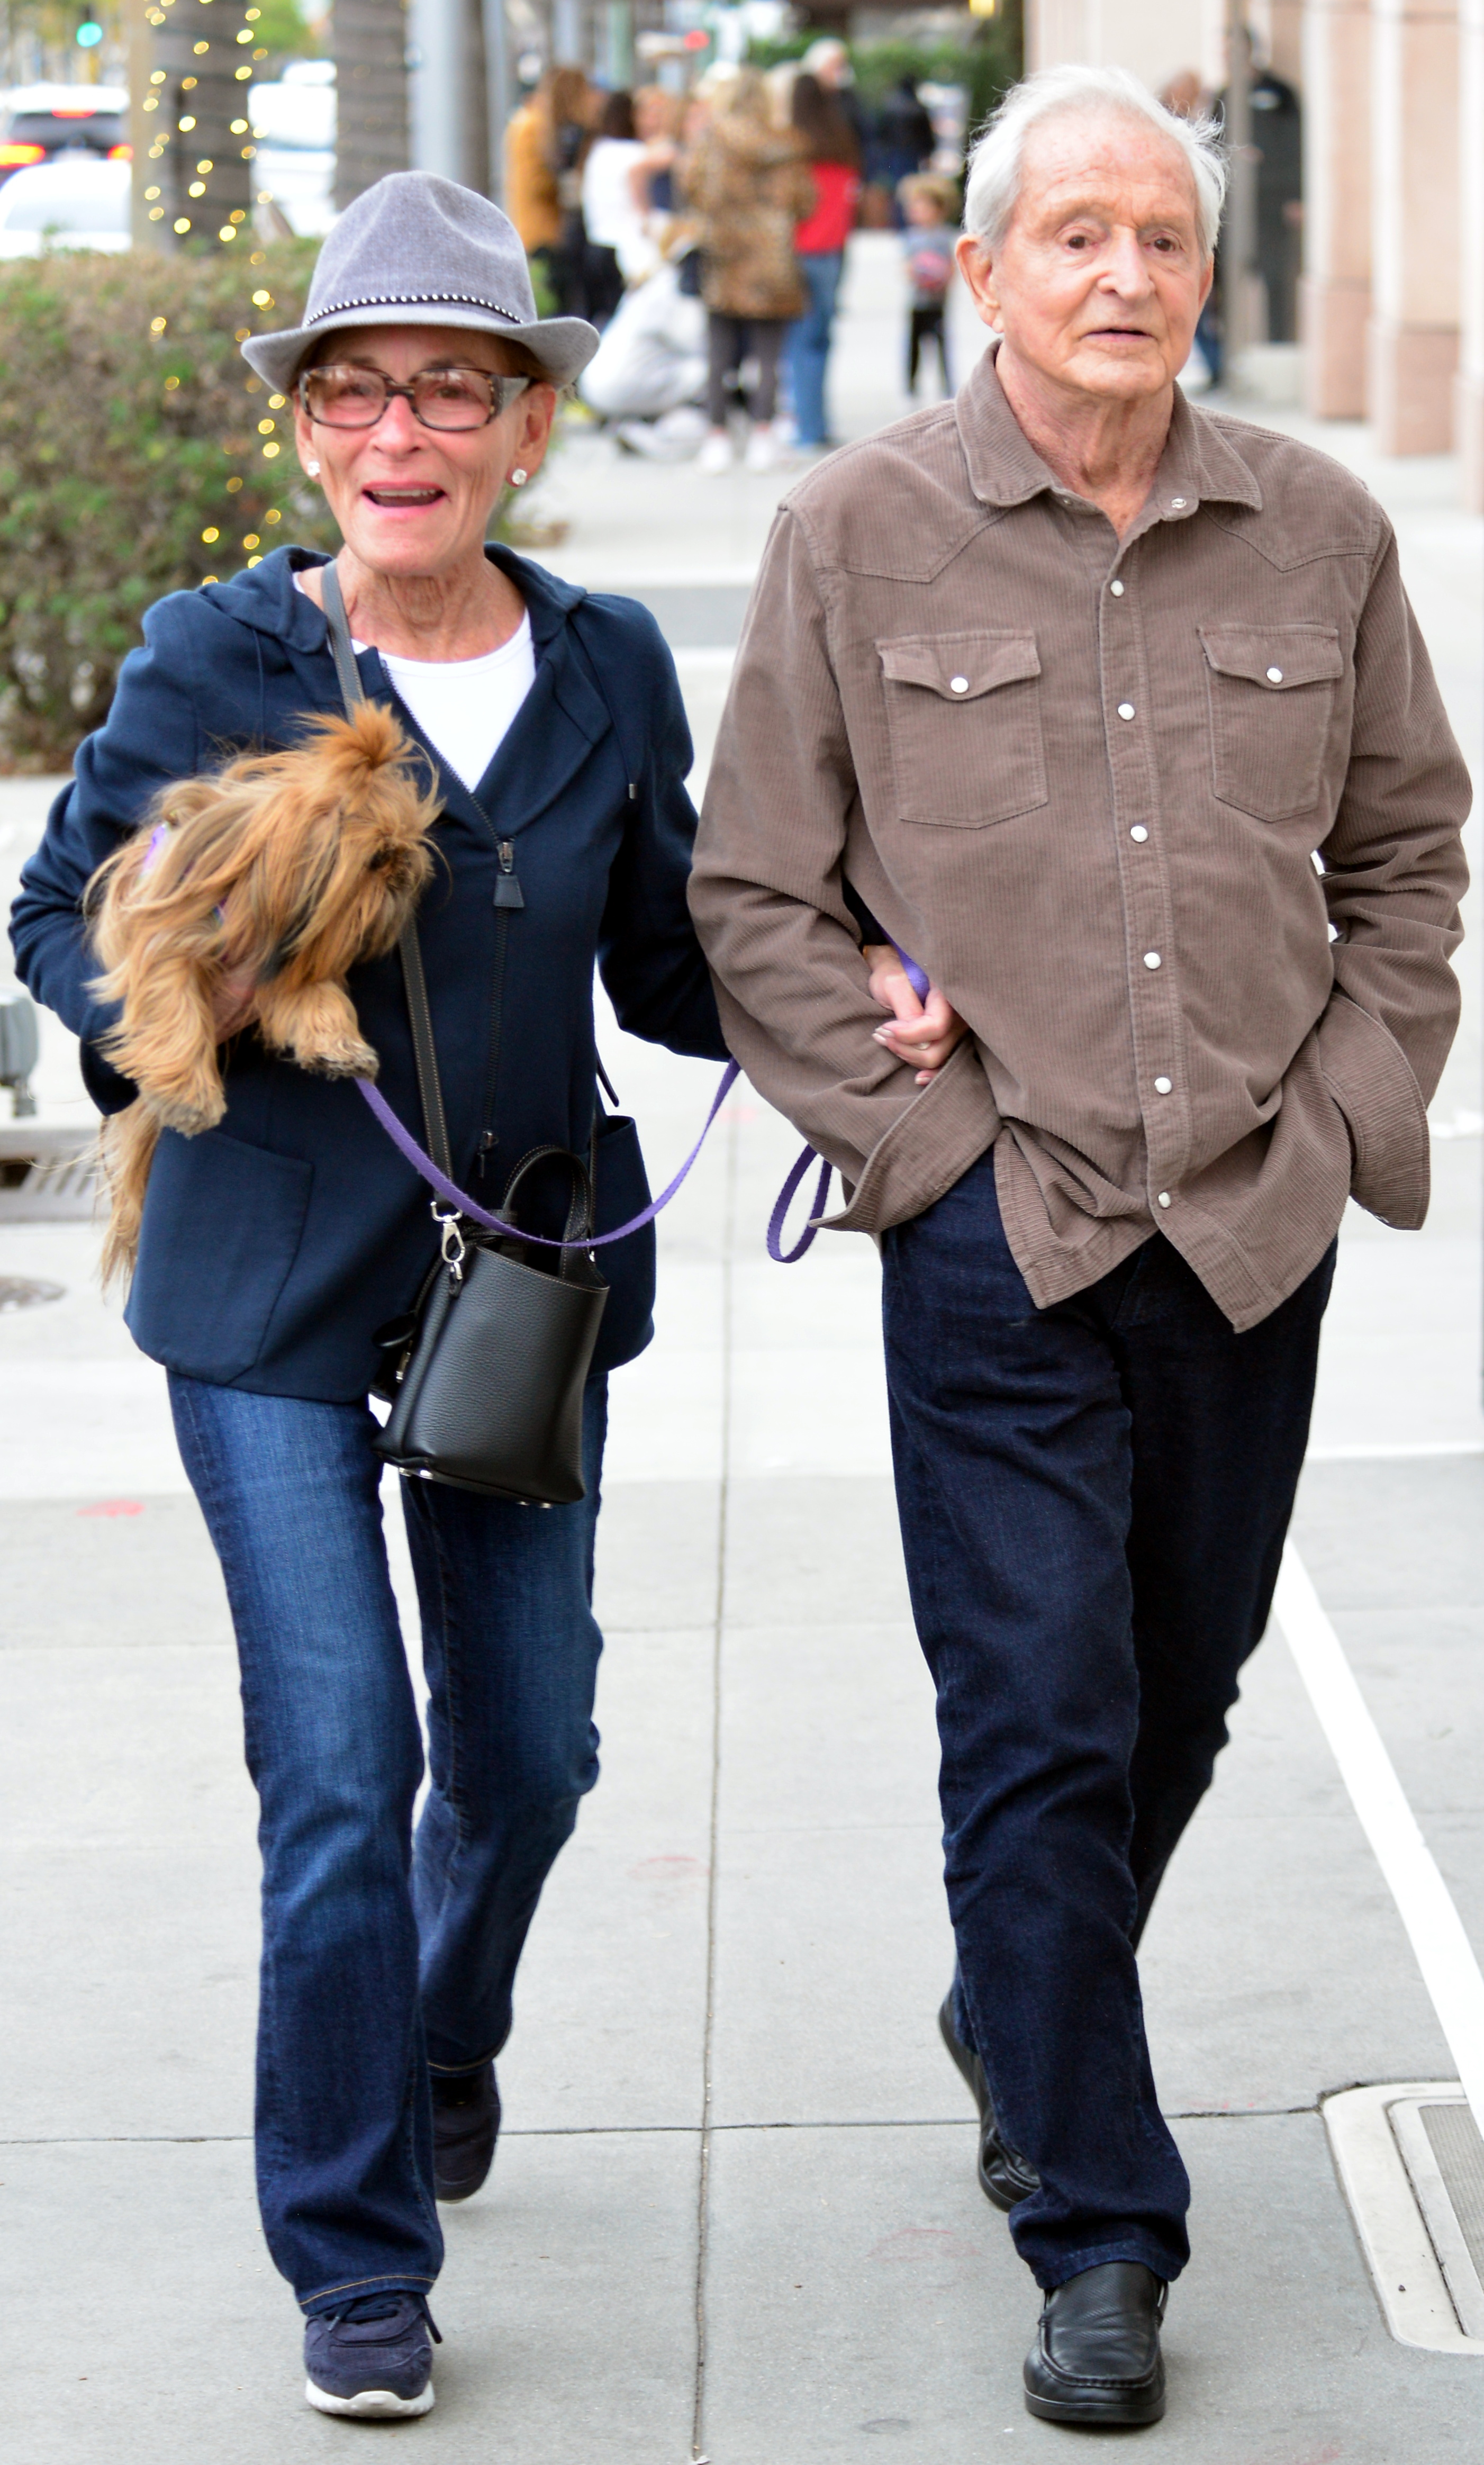 Judge Judy Sheindlin and Jerry Sheindlin spotted in Beverly Hills, California on December 17, 2022 | Source: Getty Images